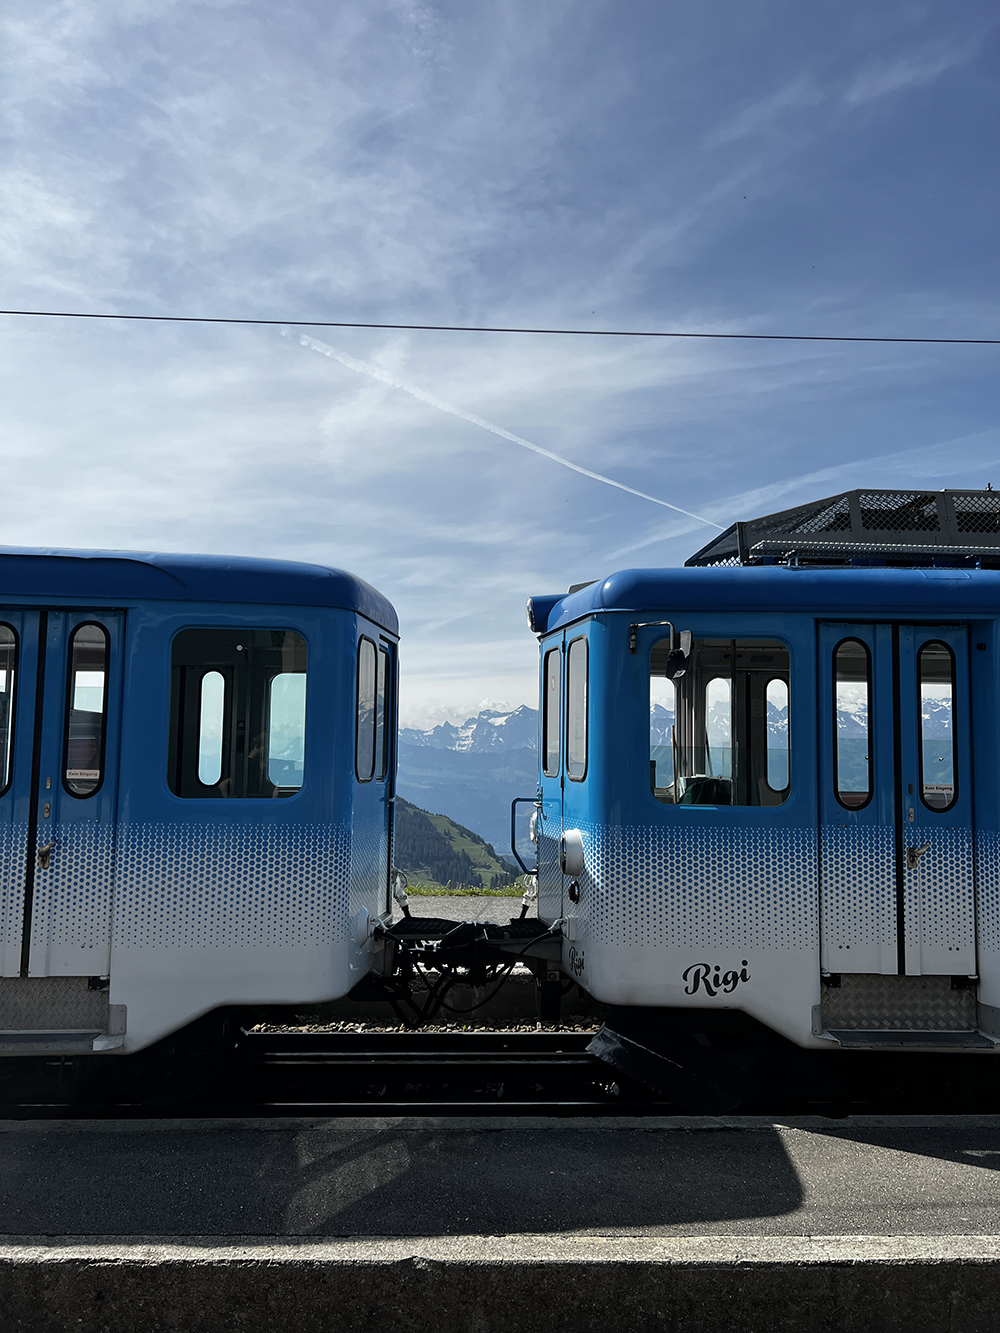 Two train cars at their connection point.